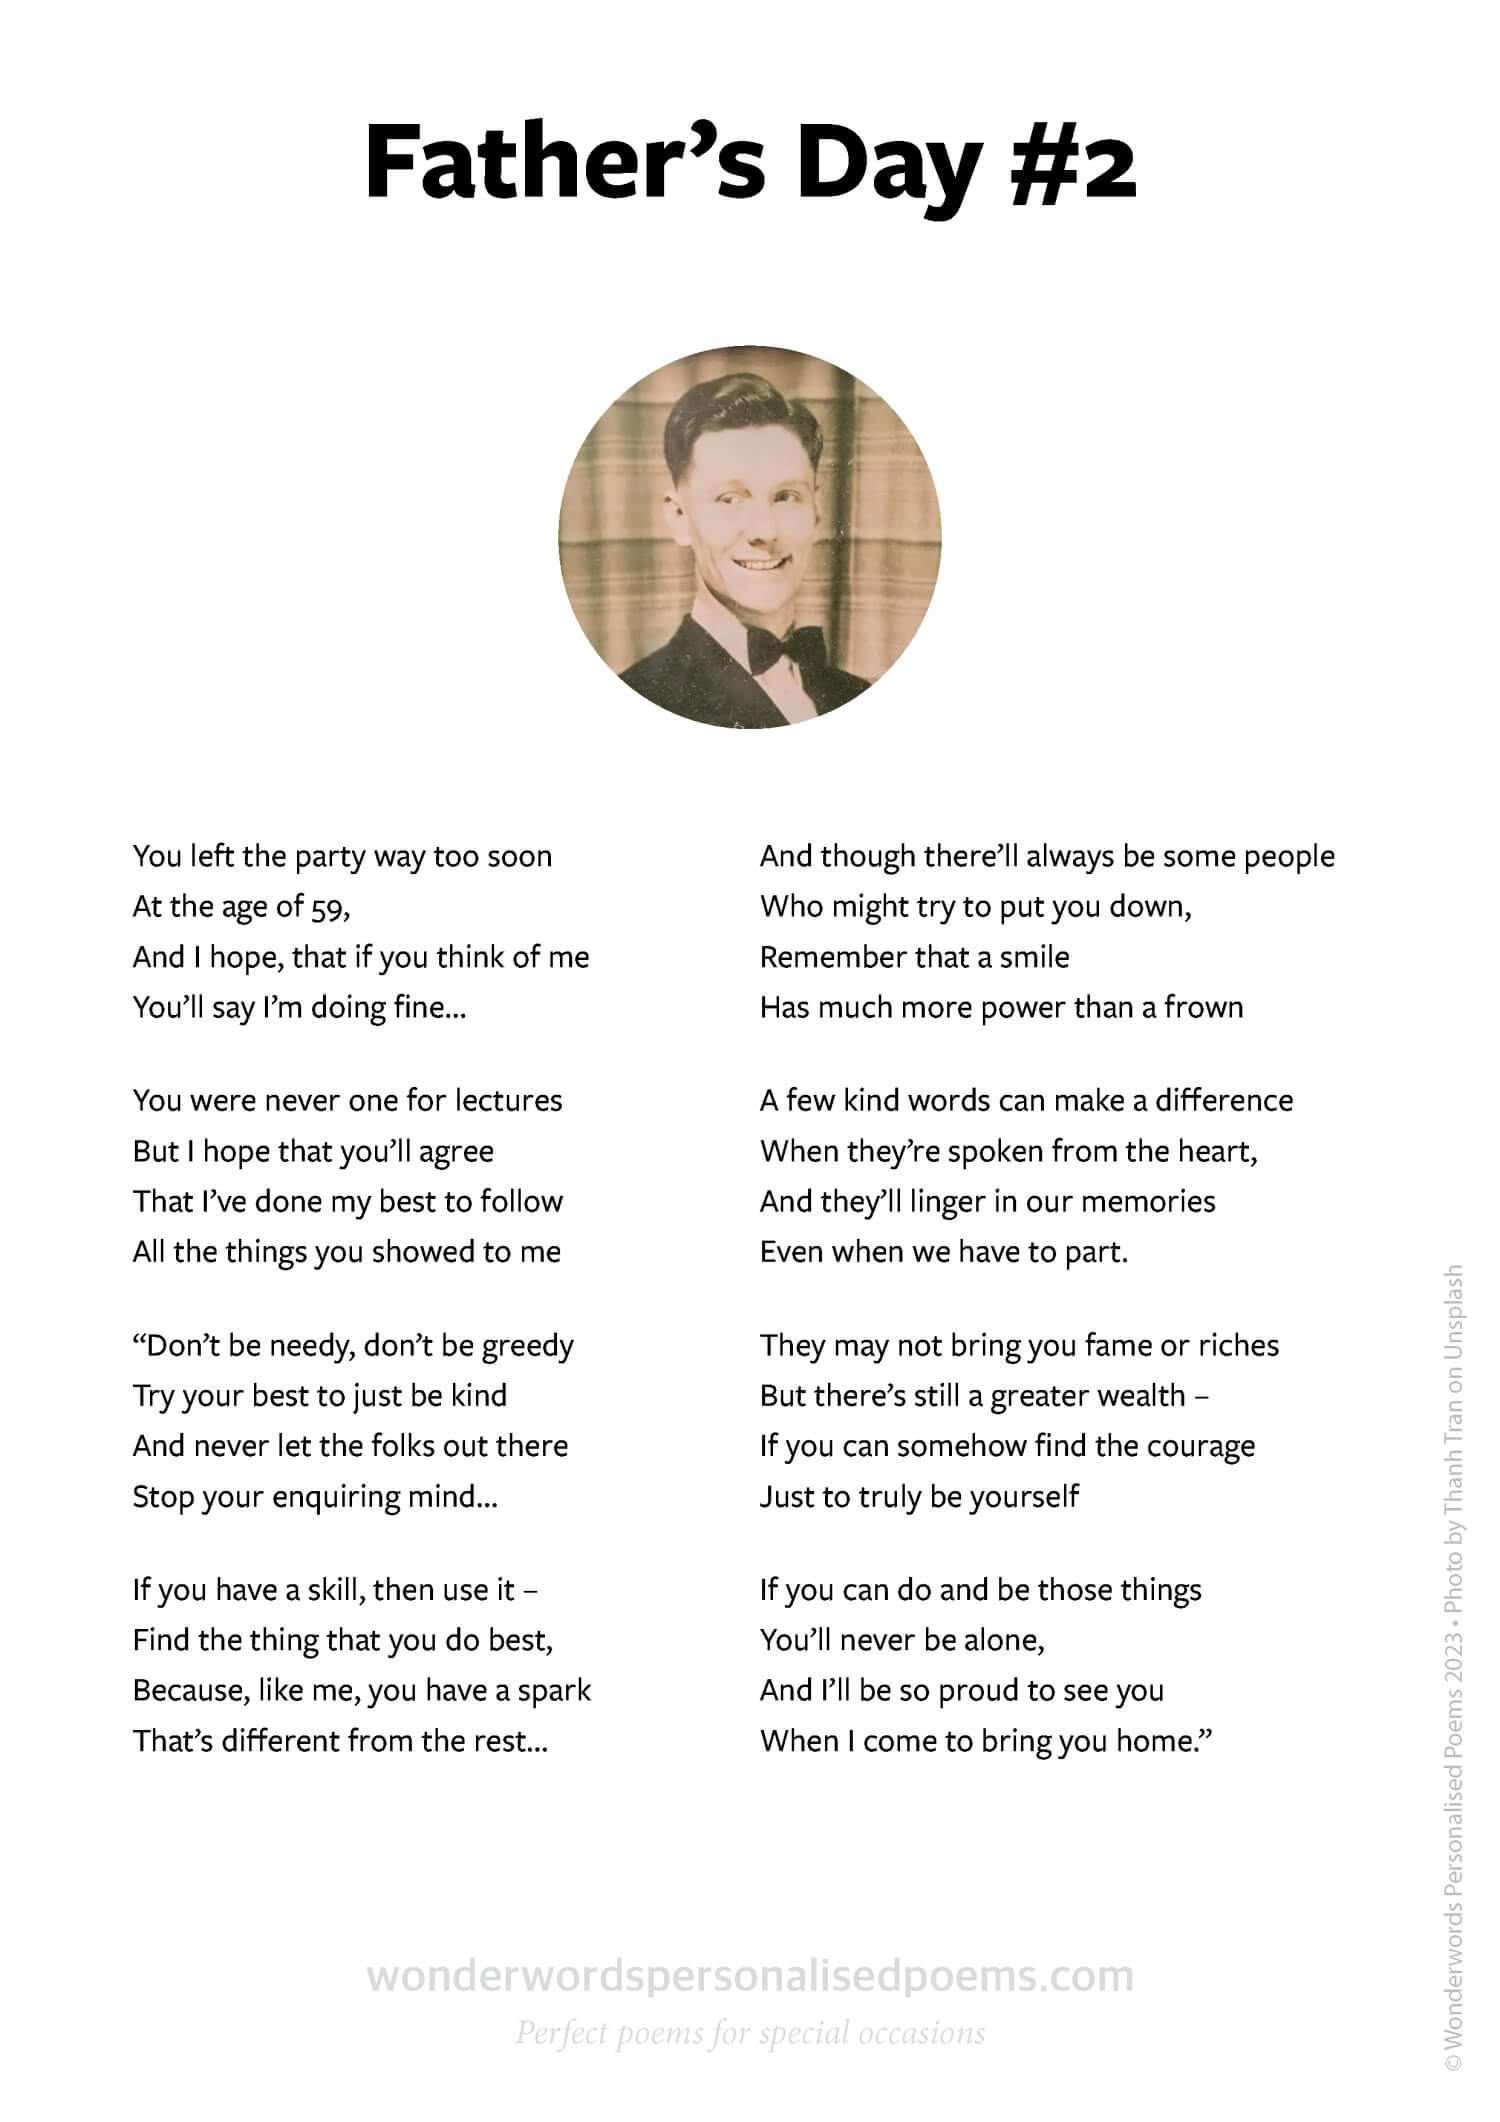 A sample Father's Day poem from Wonderwords Personalised Poems